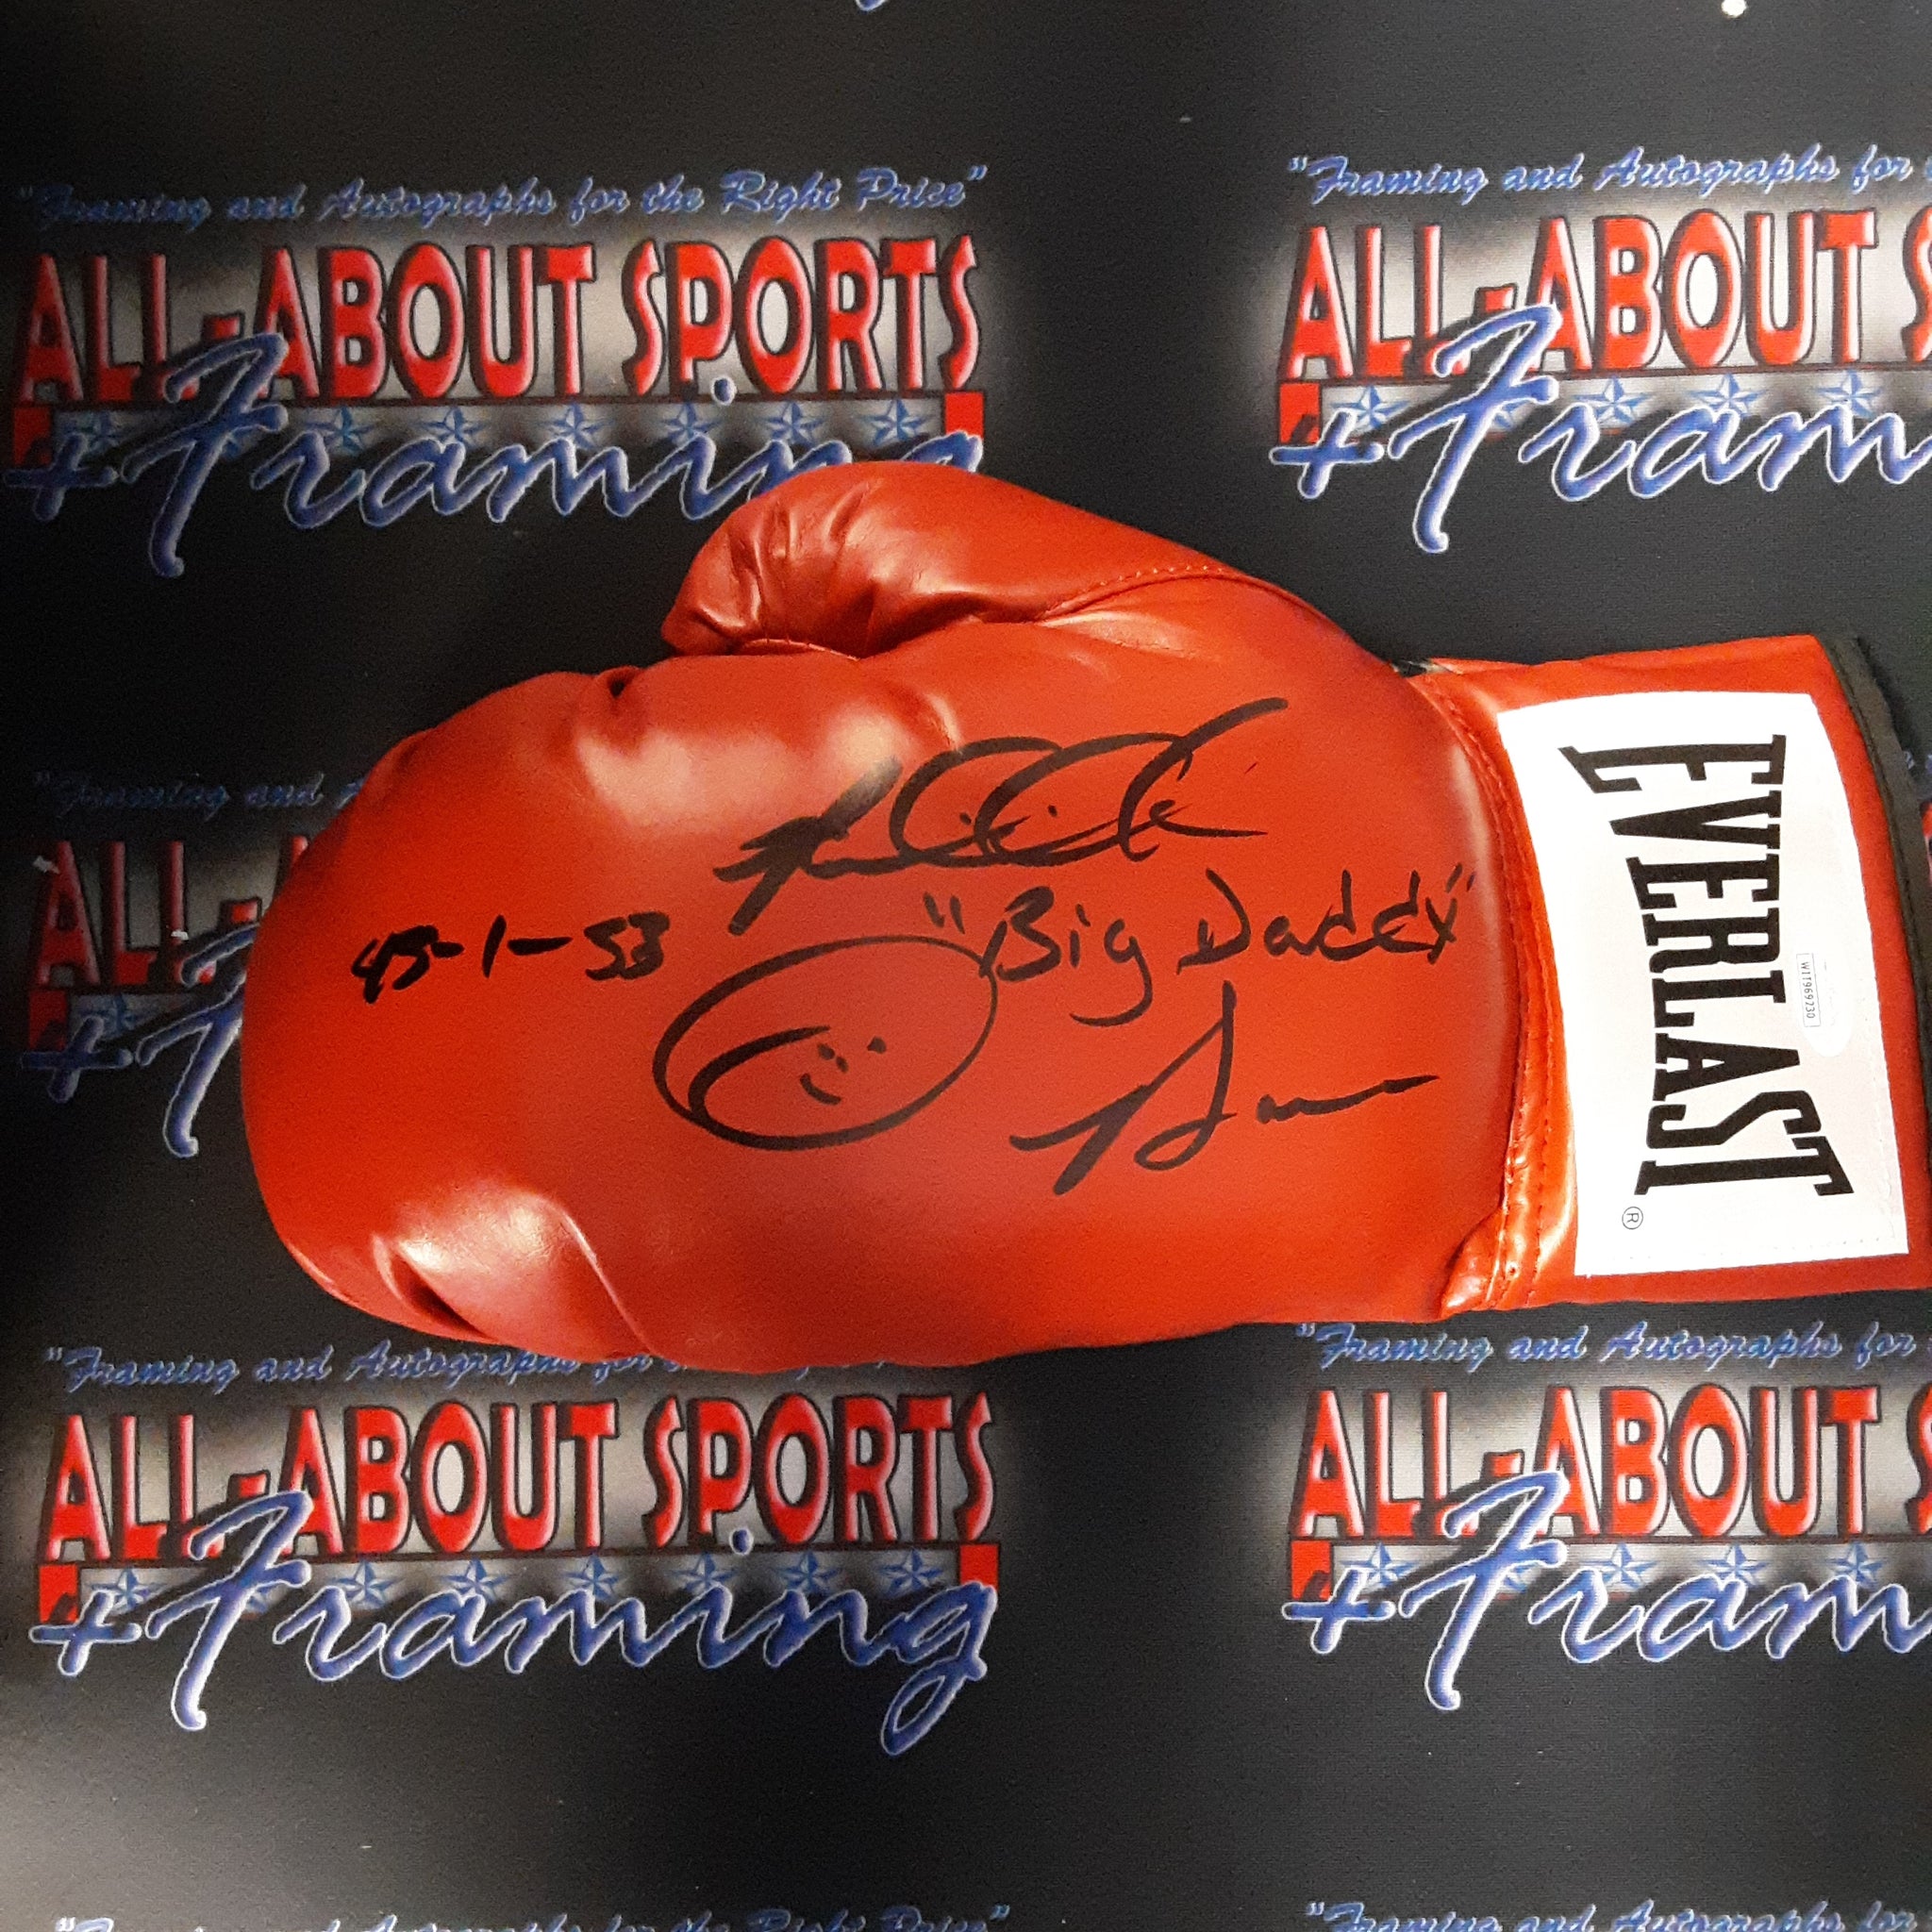 Riddick "Big Daddy" Bowe Authentic Signed Boxing Glove Autographed JSA